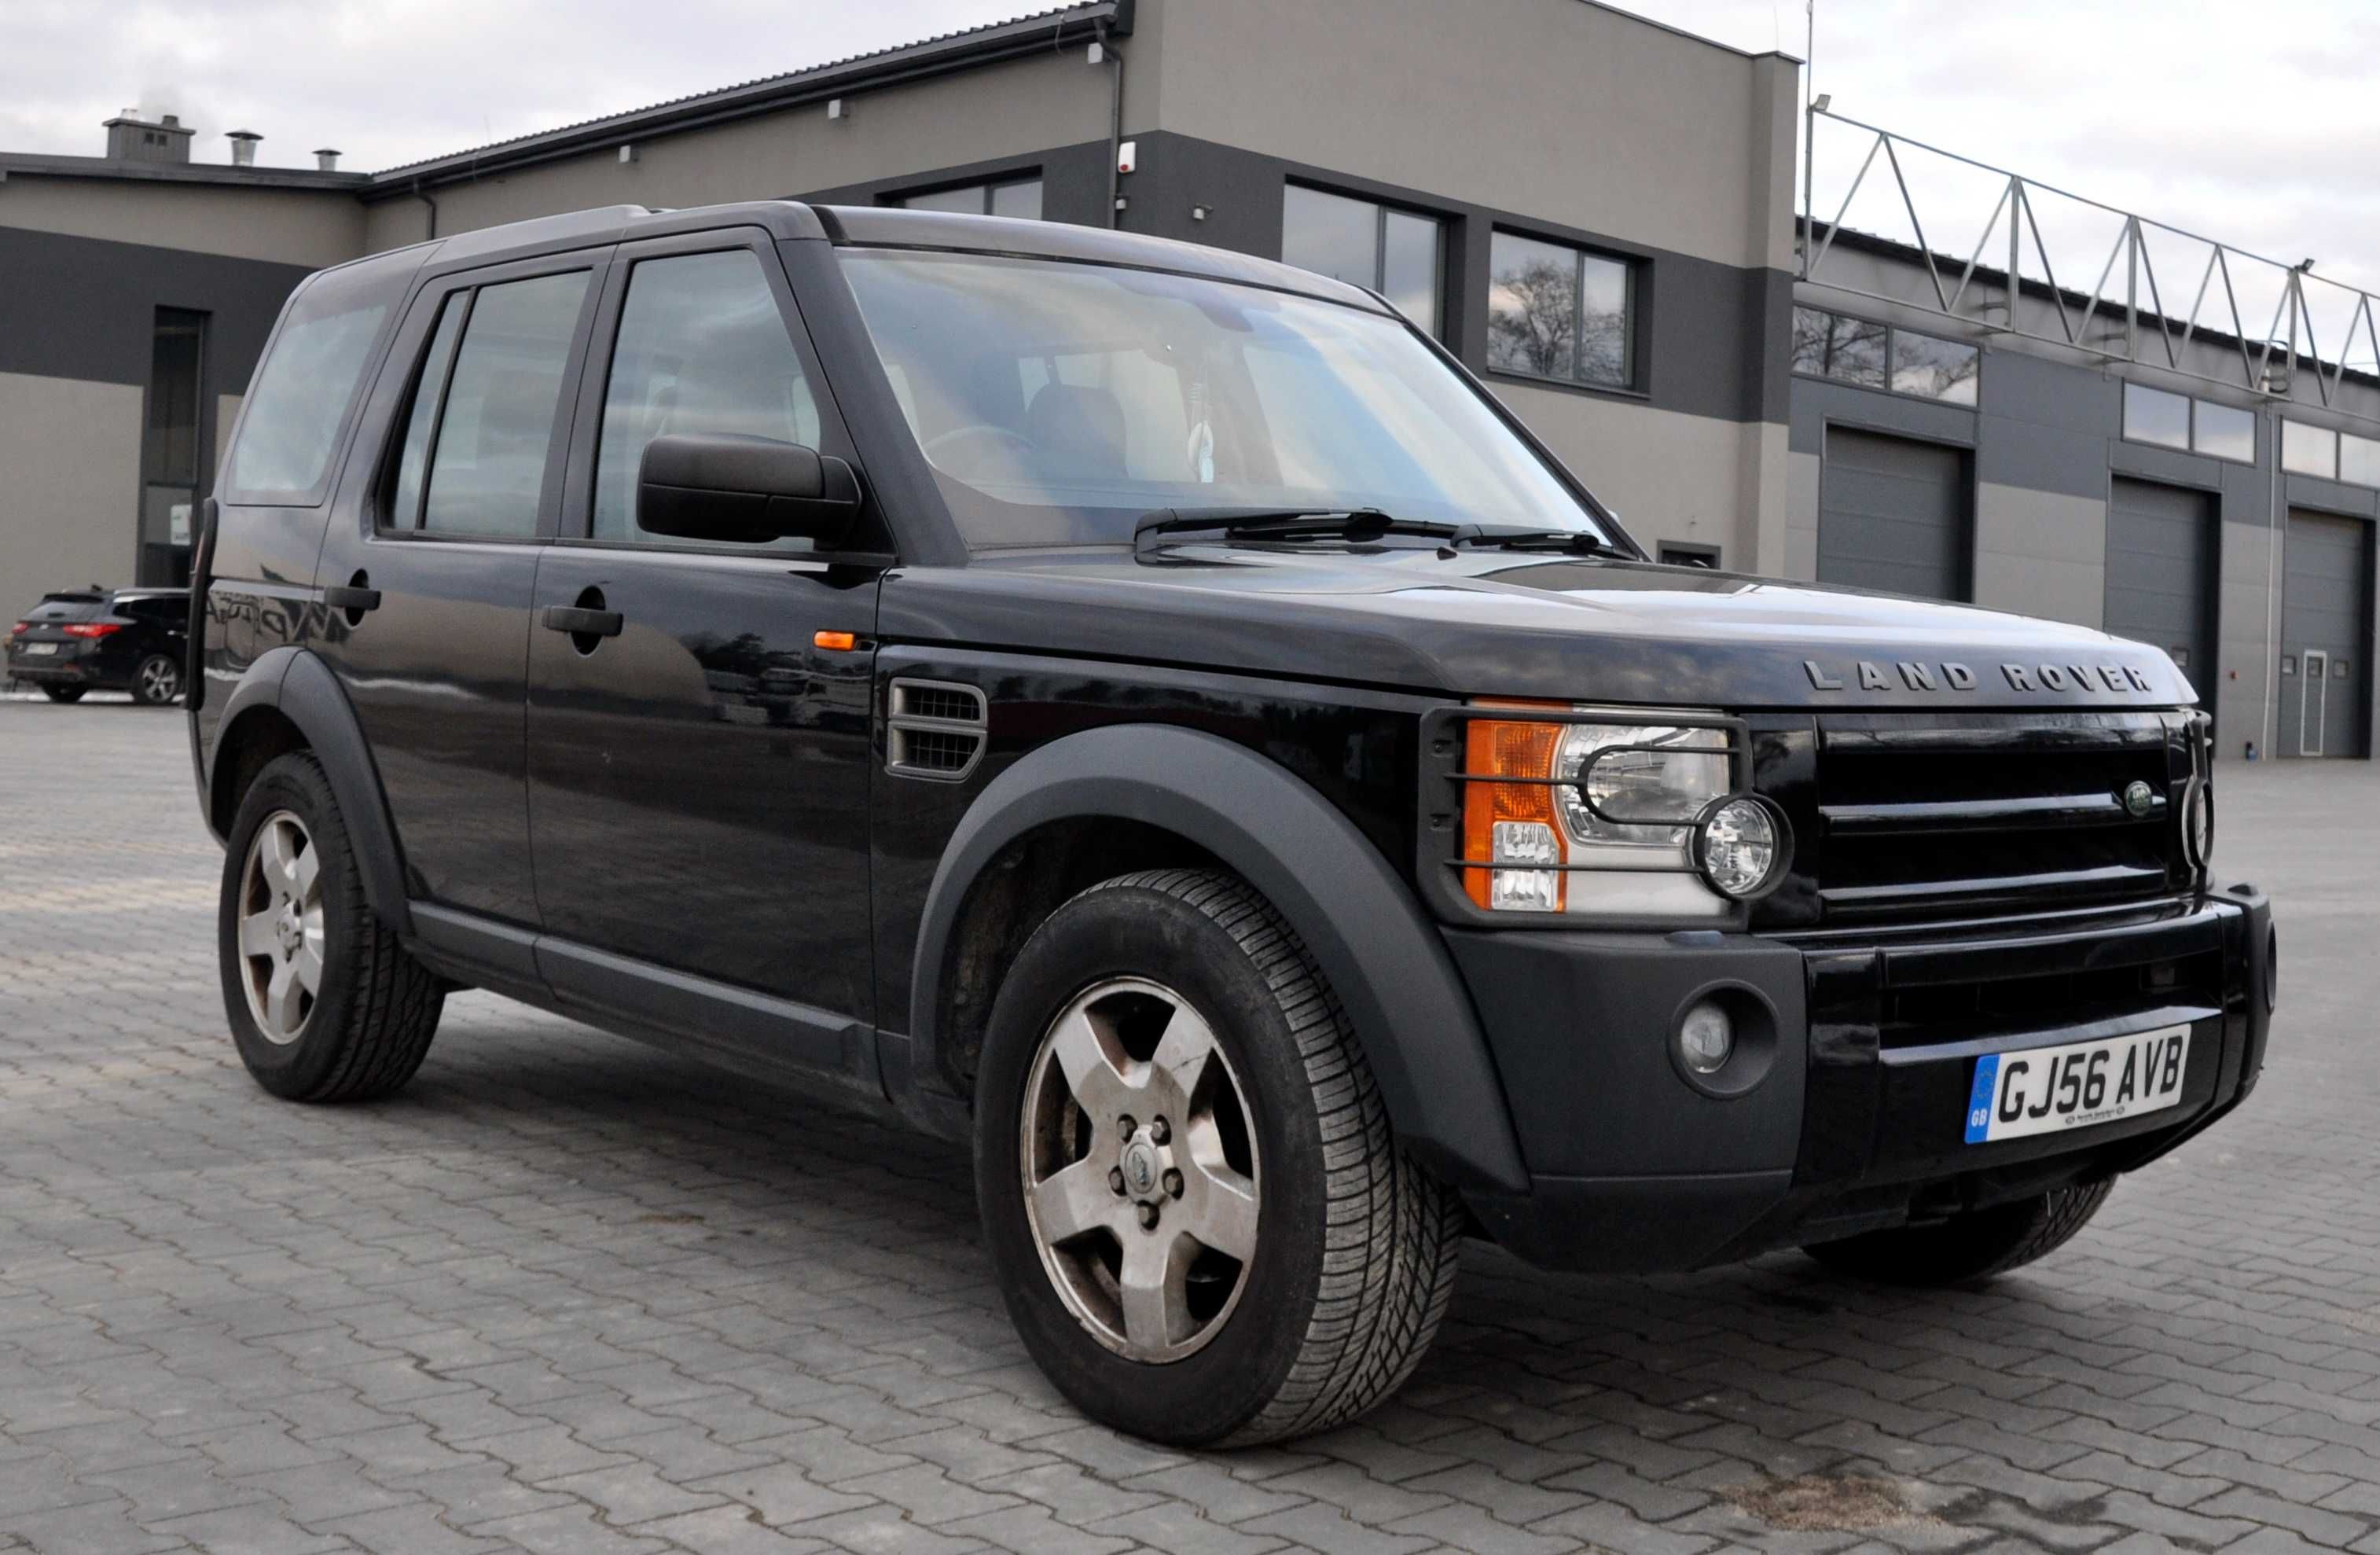 Land Rover Discovery III / ANGLIA / 2,7 Diesel / 190 KM